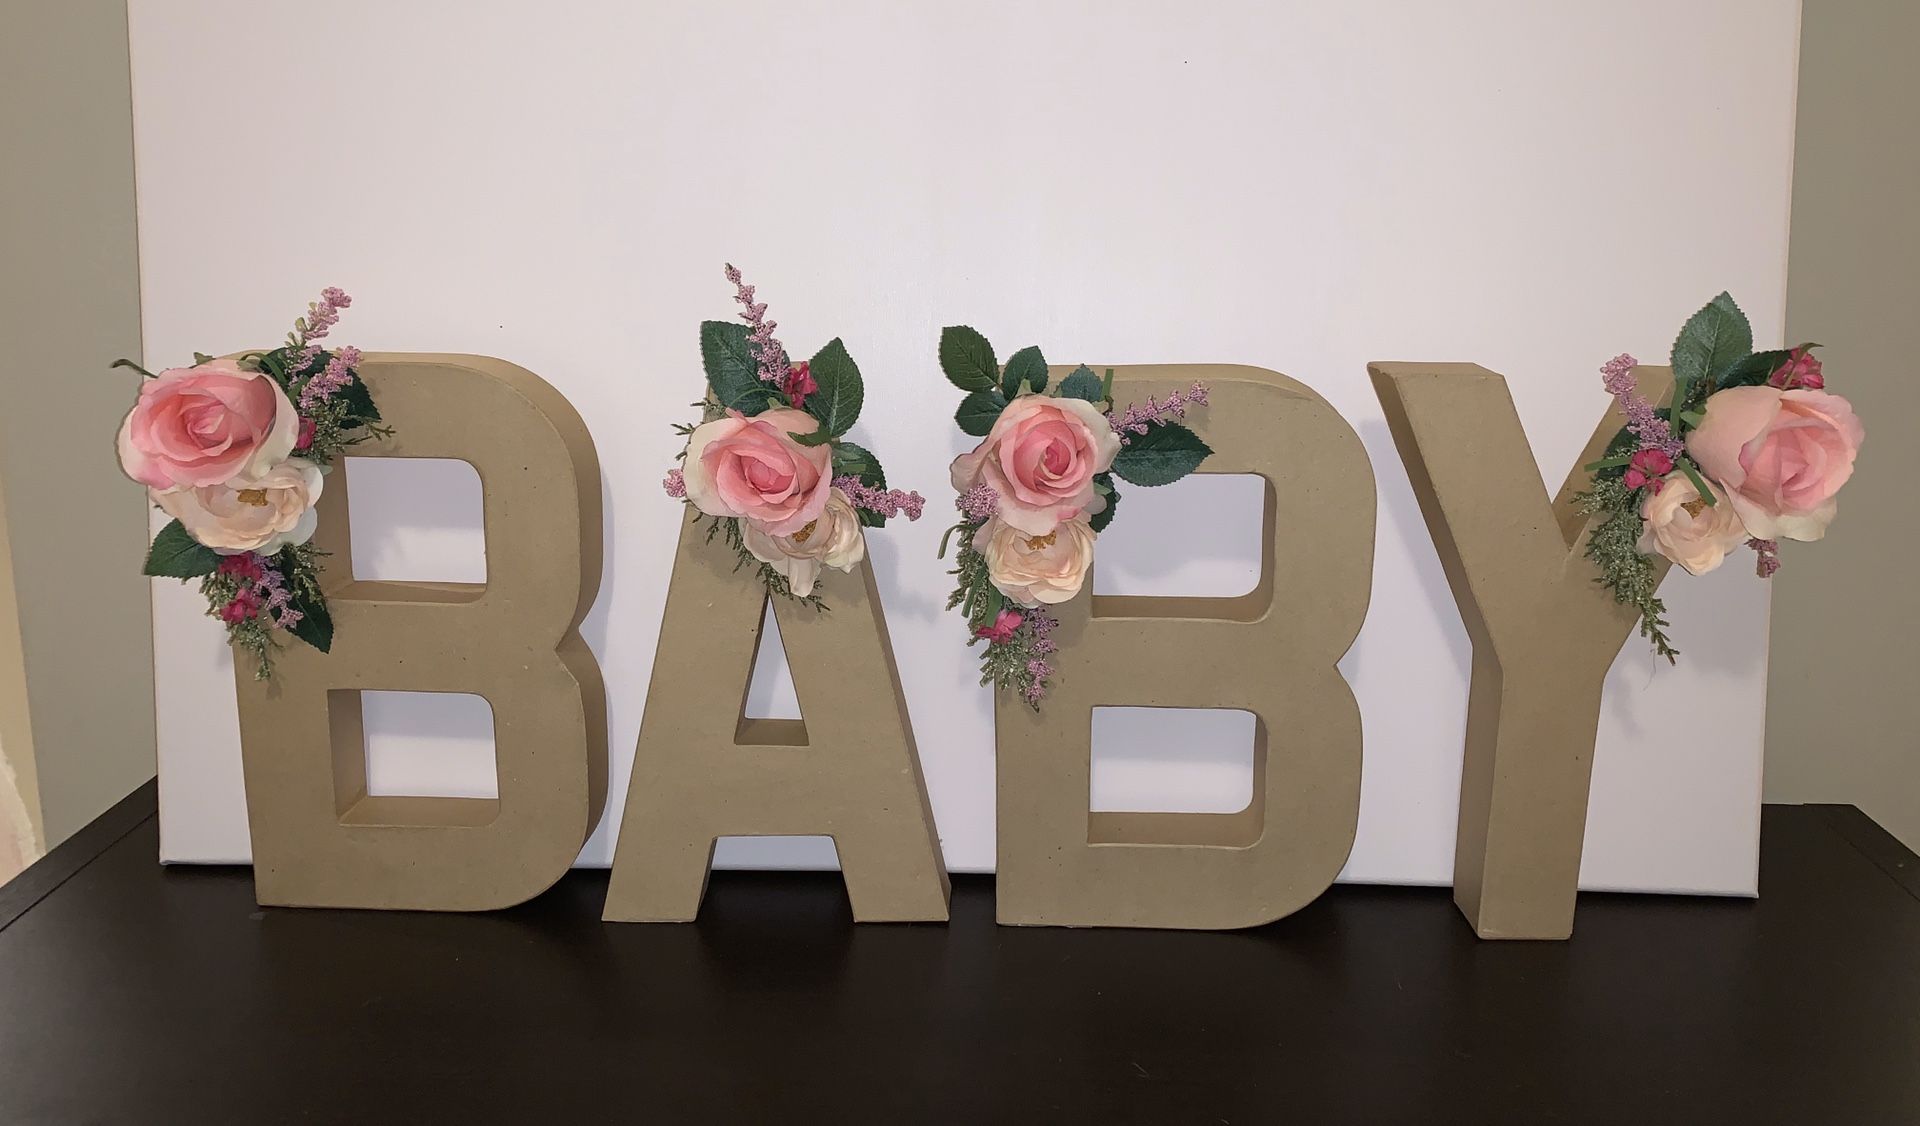 Baby shower decorations